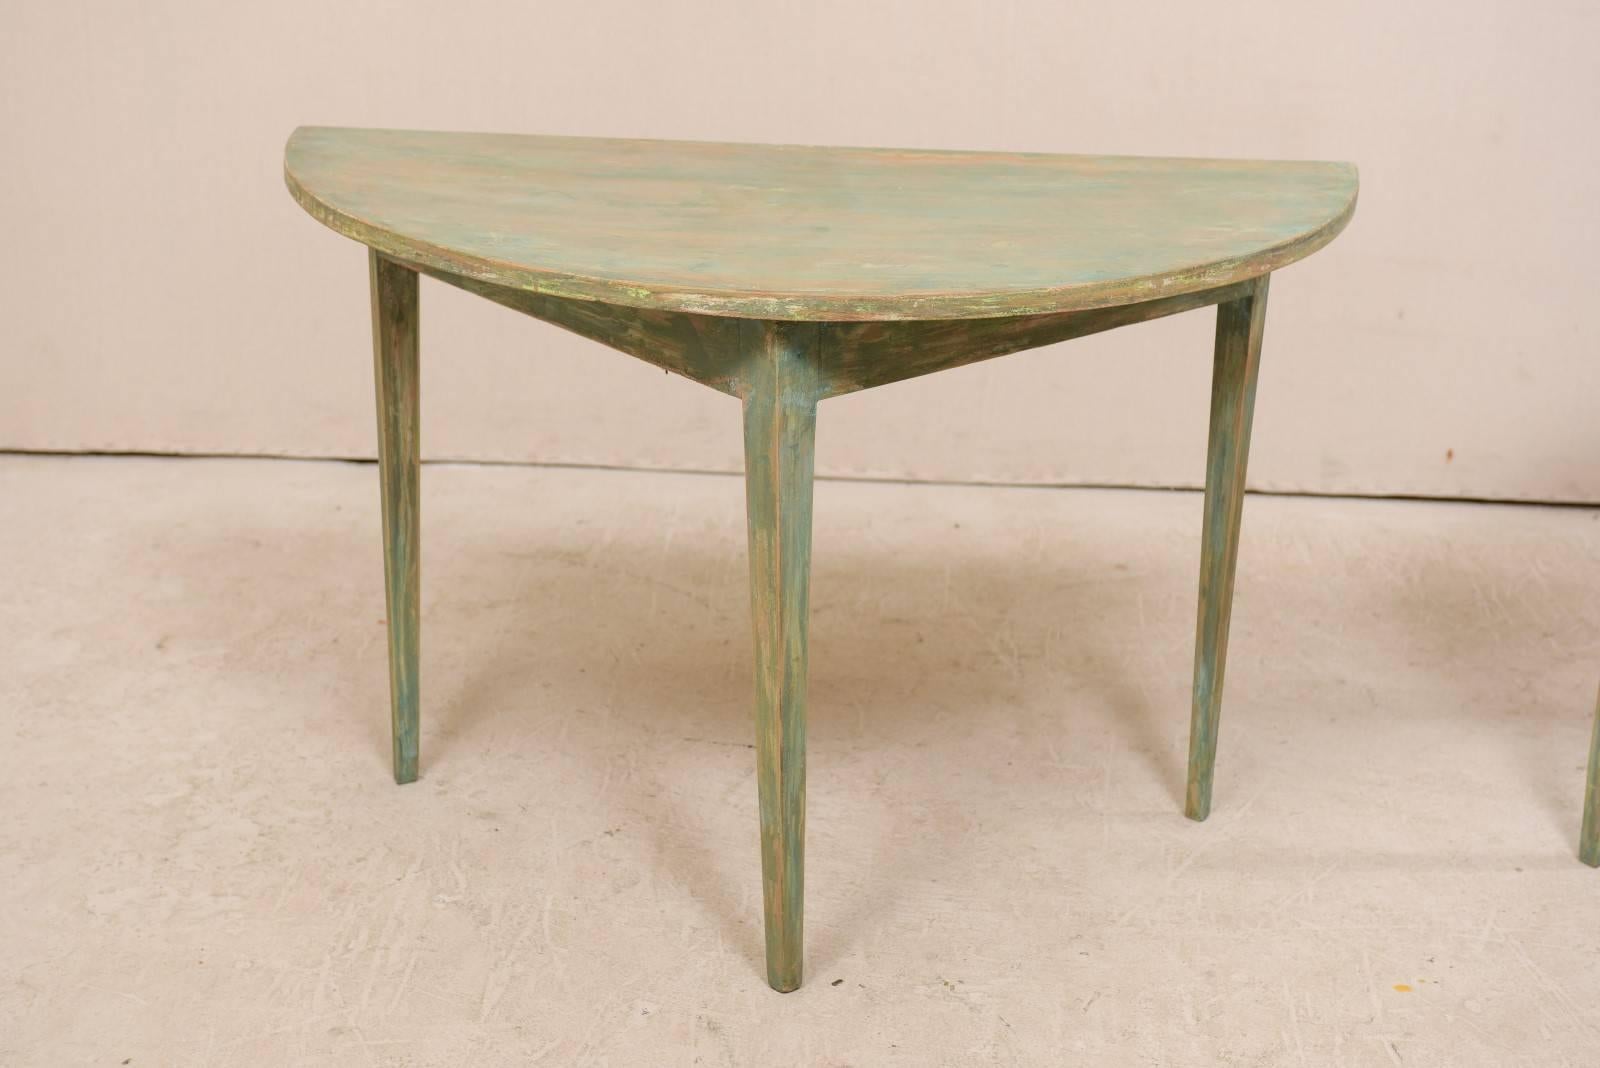 Pair of Swedish 19th Century Painted Wood Demilune Tables with Tapered Legs 7